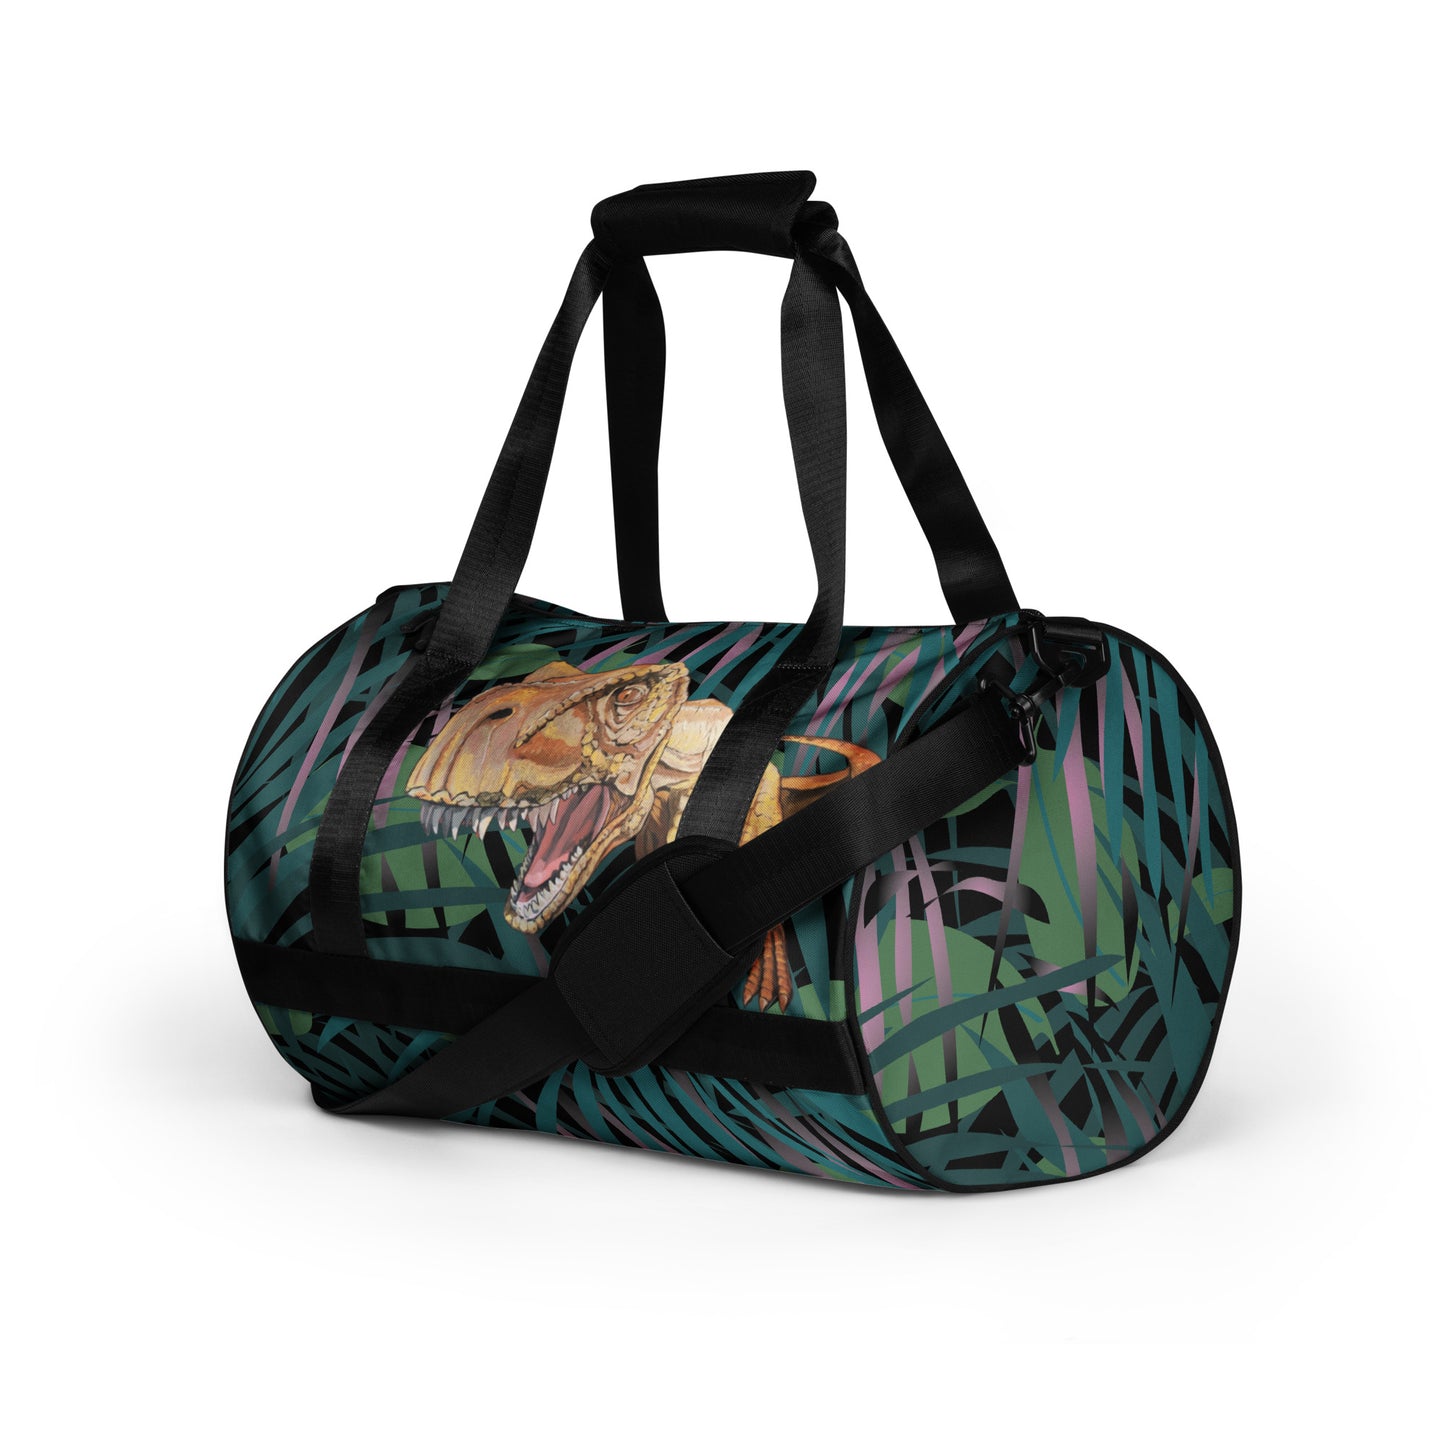 T-rex in Gold All-over print gym bag